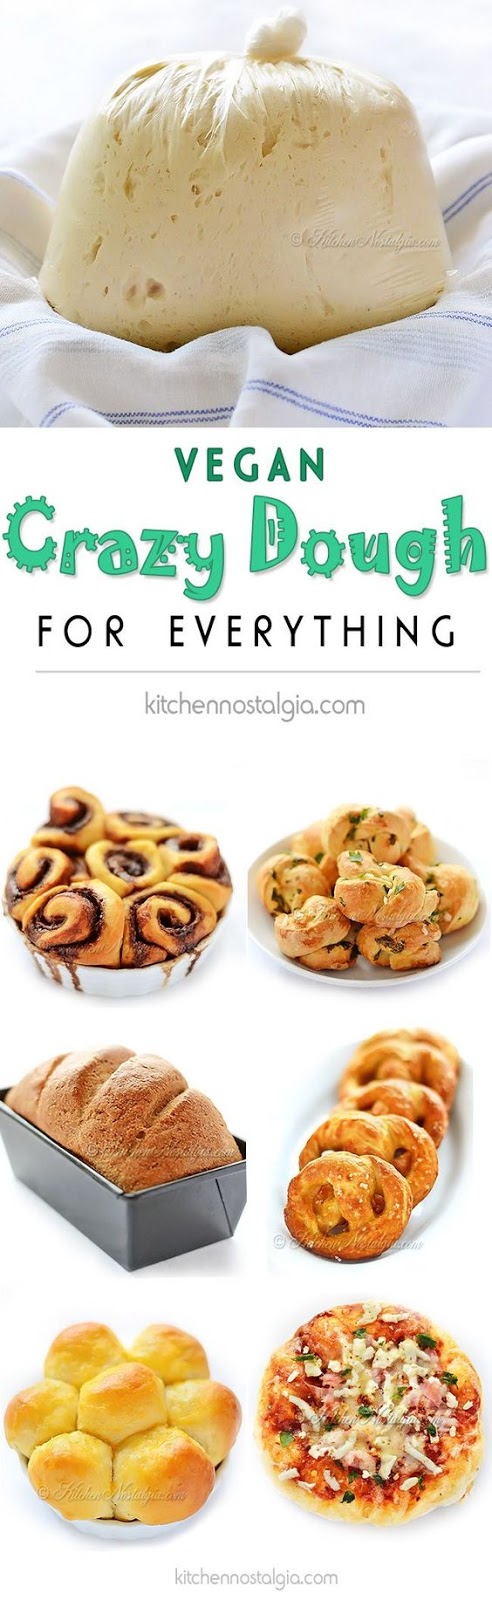 Vegan Crazy Dough for Everything - make one miracle dough, keep it in the fridge and use it for anything you like: pizza, cinnamon rolls, dinner rolls, pretzels, garlic knots, focaccia, bread... Substitute GF flour!